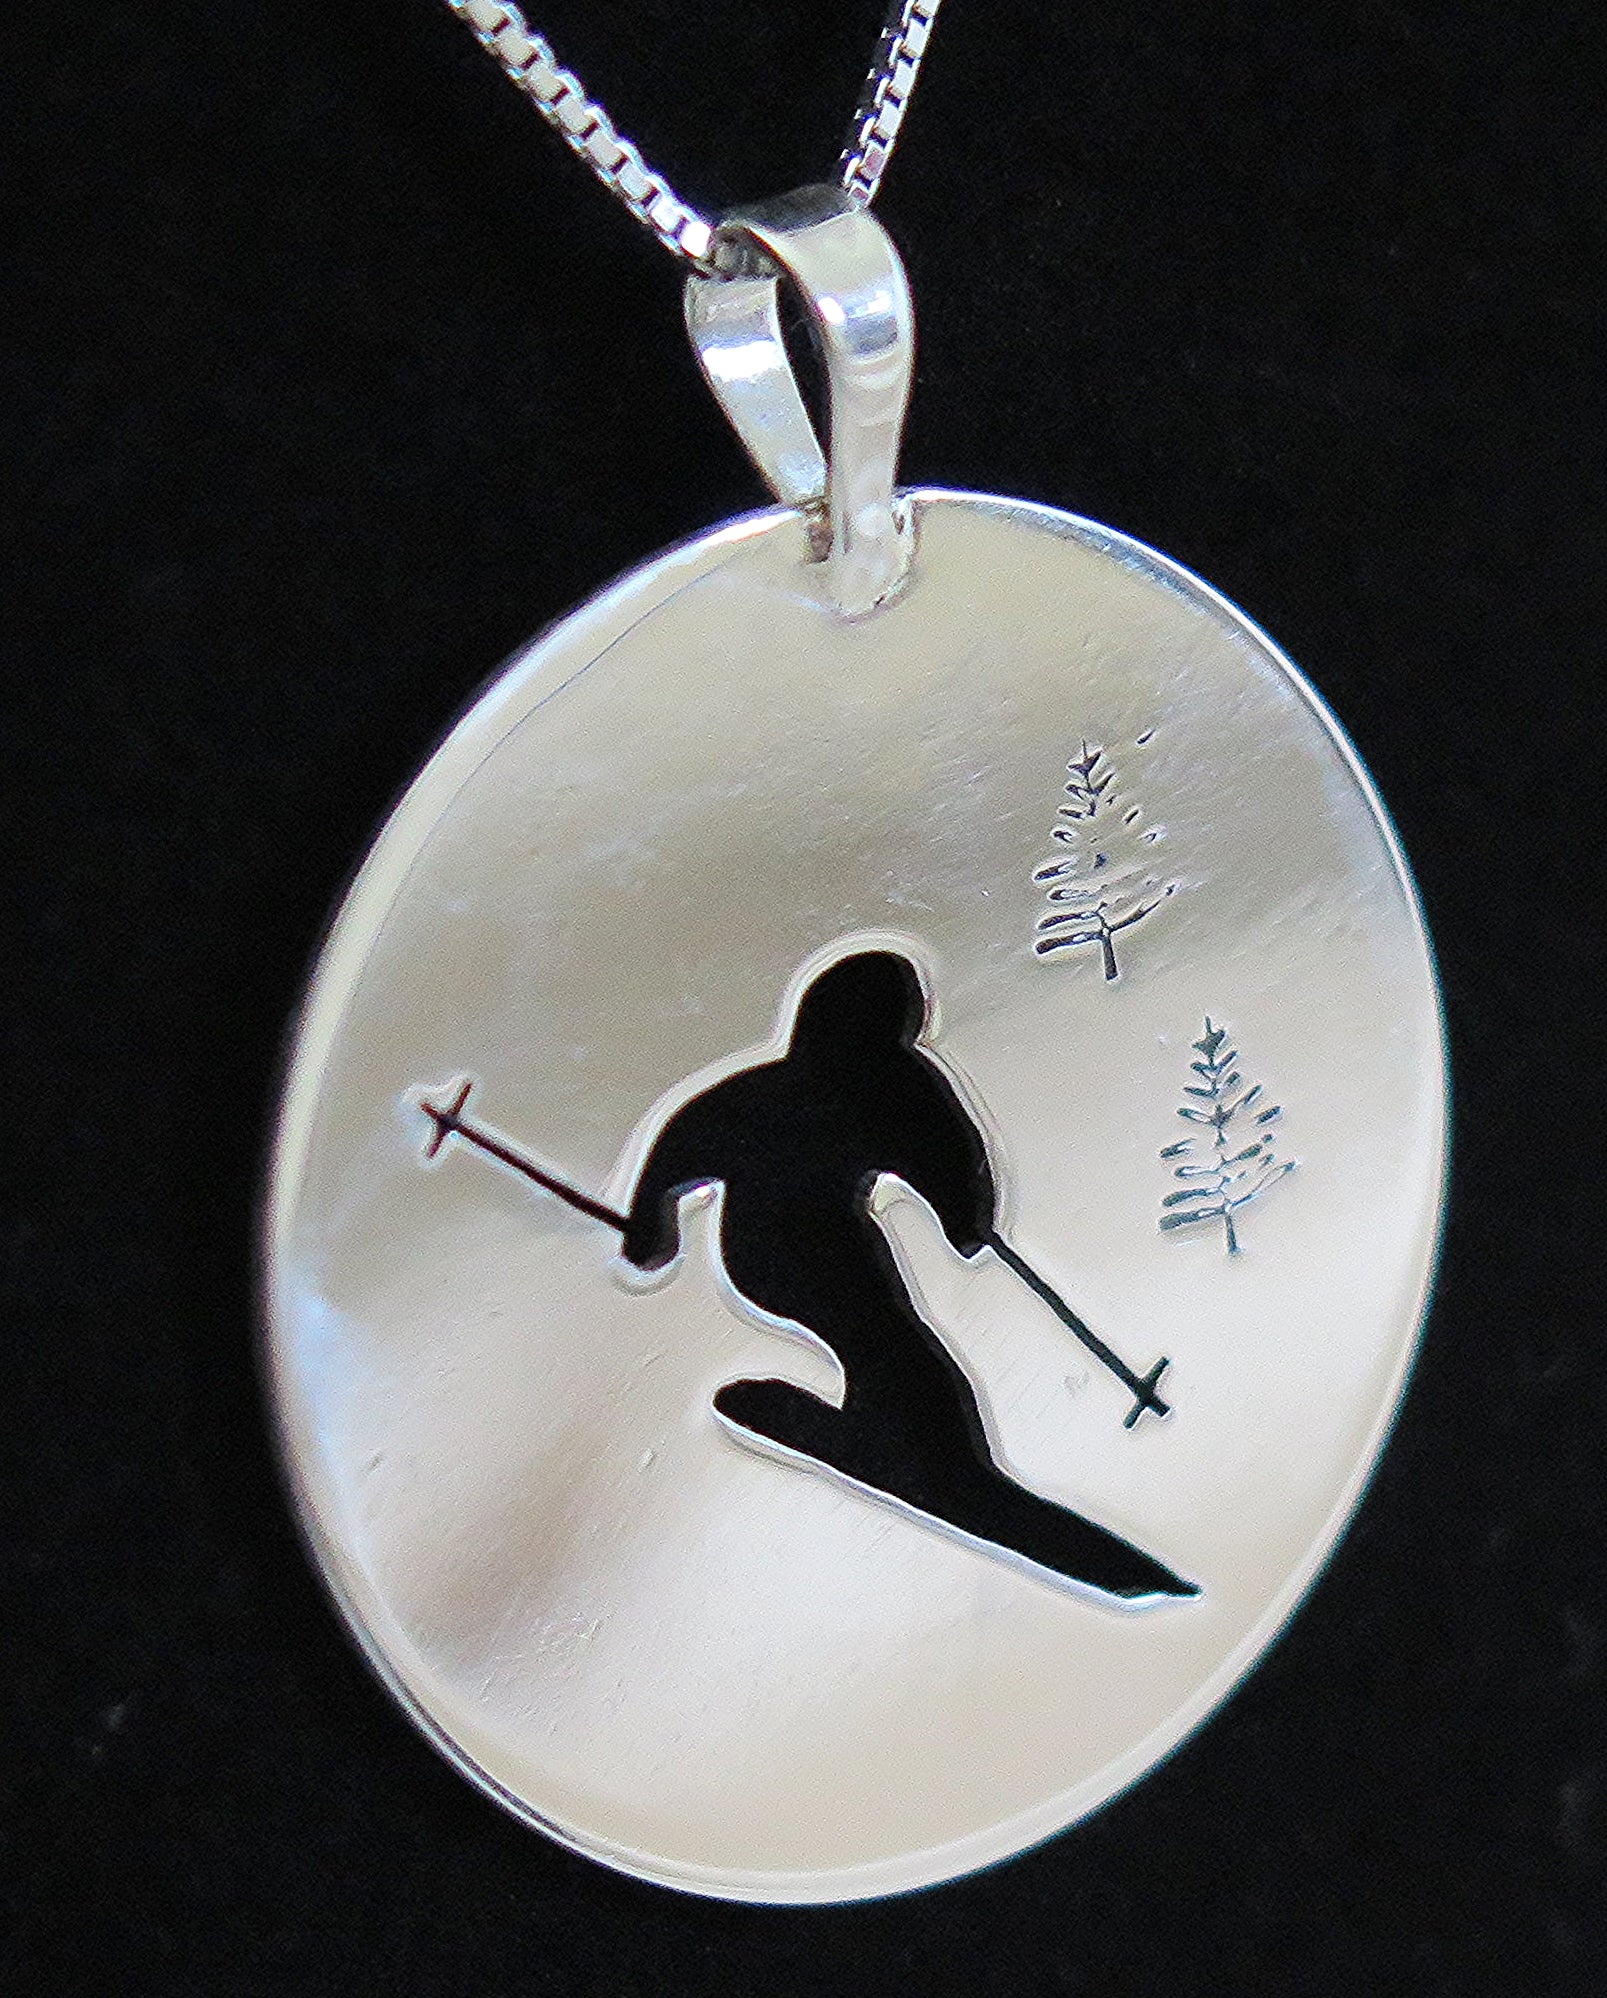 Skier jewelry SET sterling silver 3/4" dia earrings and 1" dia pendant handsawn necklace holiday gift ski lover winter jewelry Free shipping and gift box